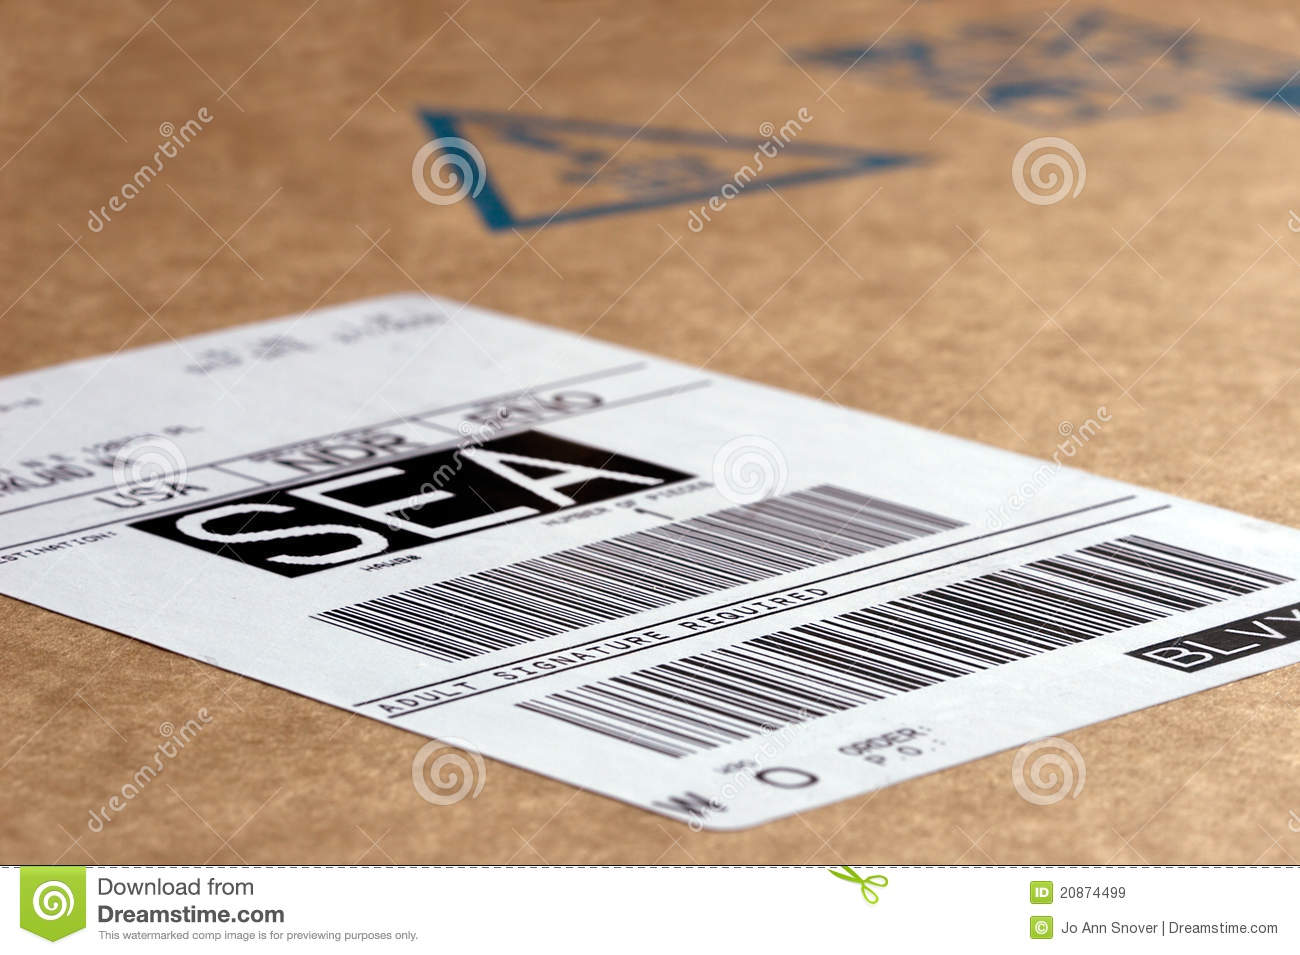 Adult Signature Required Royalty Free Stock Images   Image  20874499